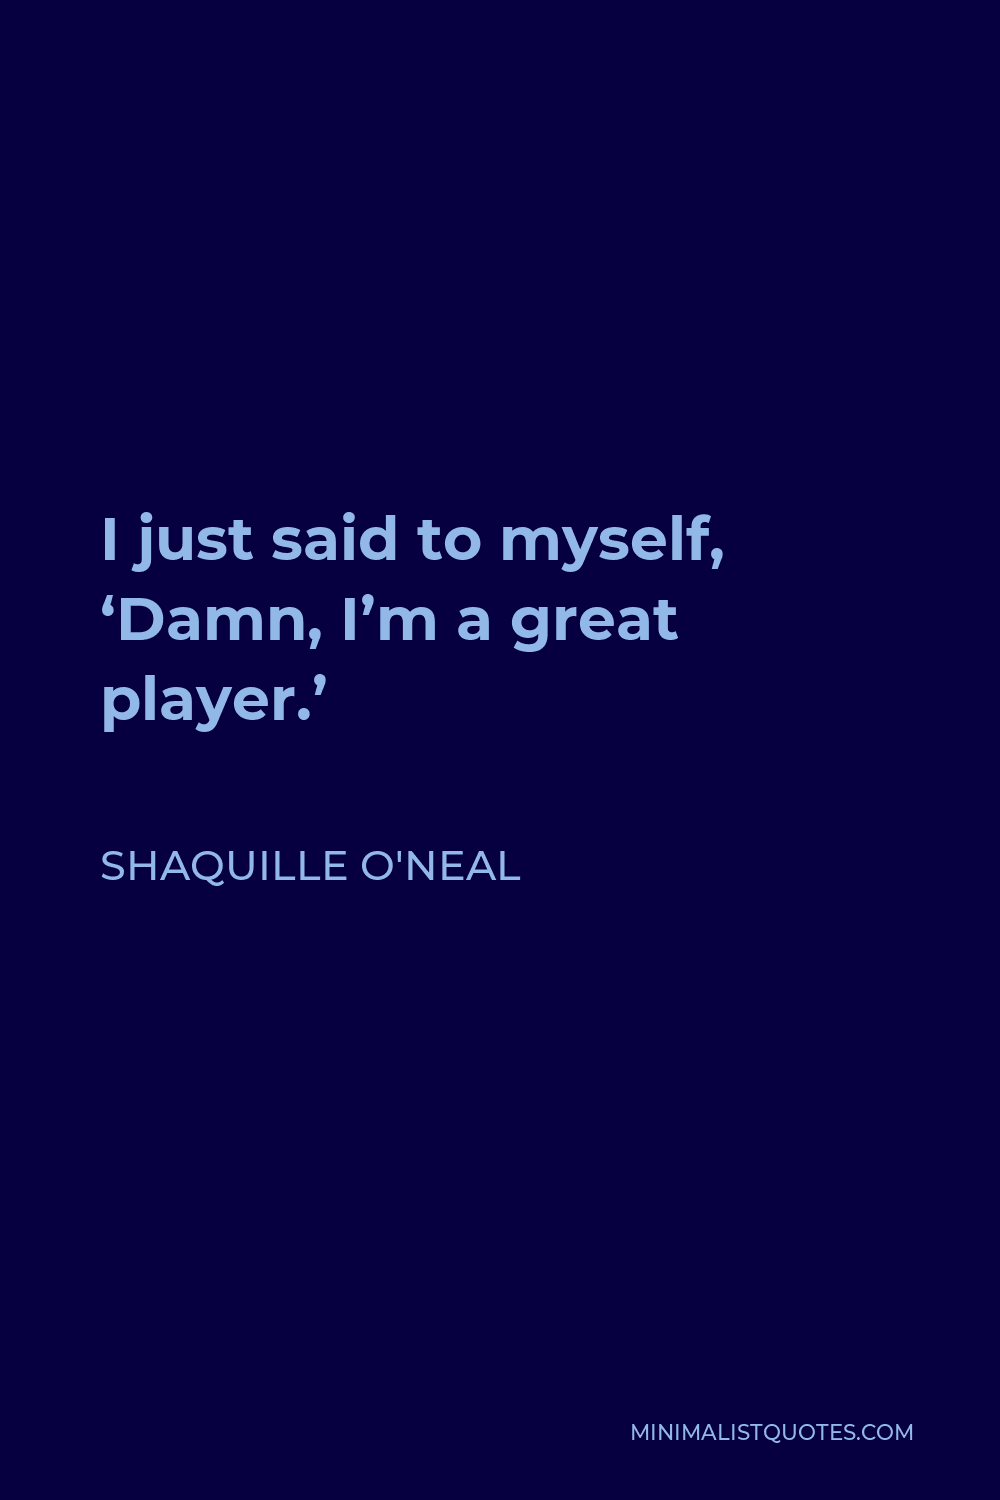 Shaquille O'Neal Quote - I just said to myself, ‘Damn, I’m a great player.’